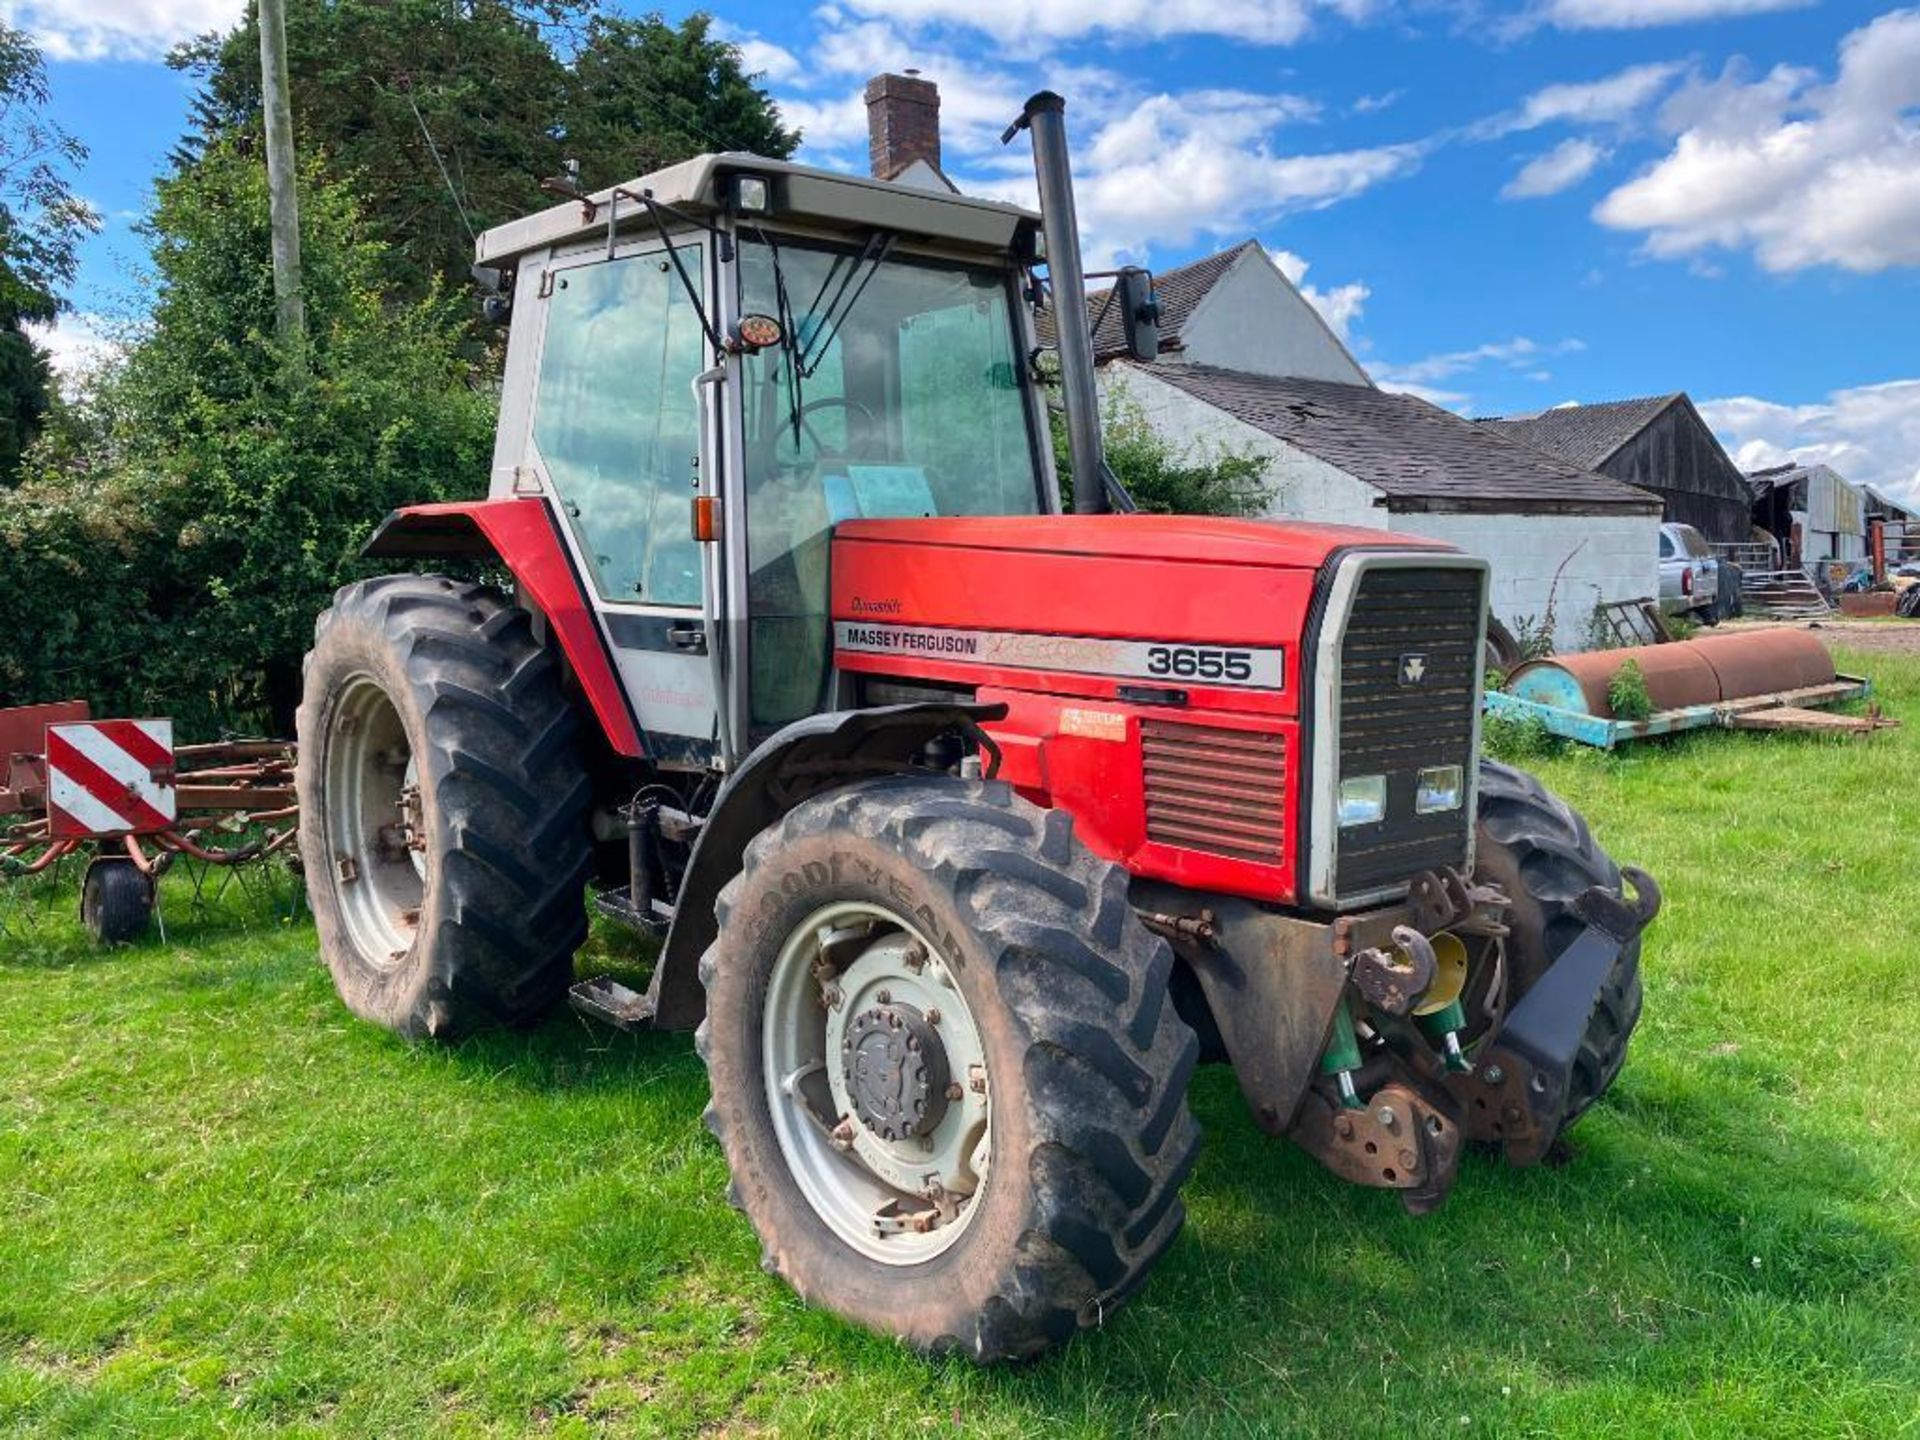 1995 Massey Ferguson 3655 Dynashift 4wd Datatronic tractor with 3 manual spools, front linkage and P - Image 8 of 23